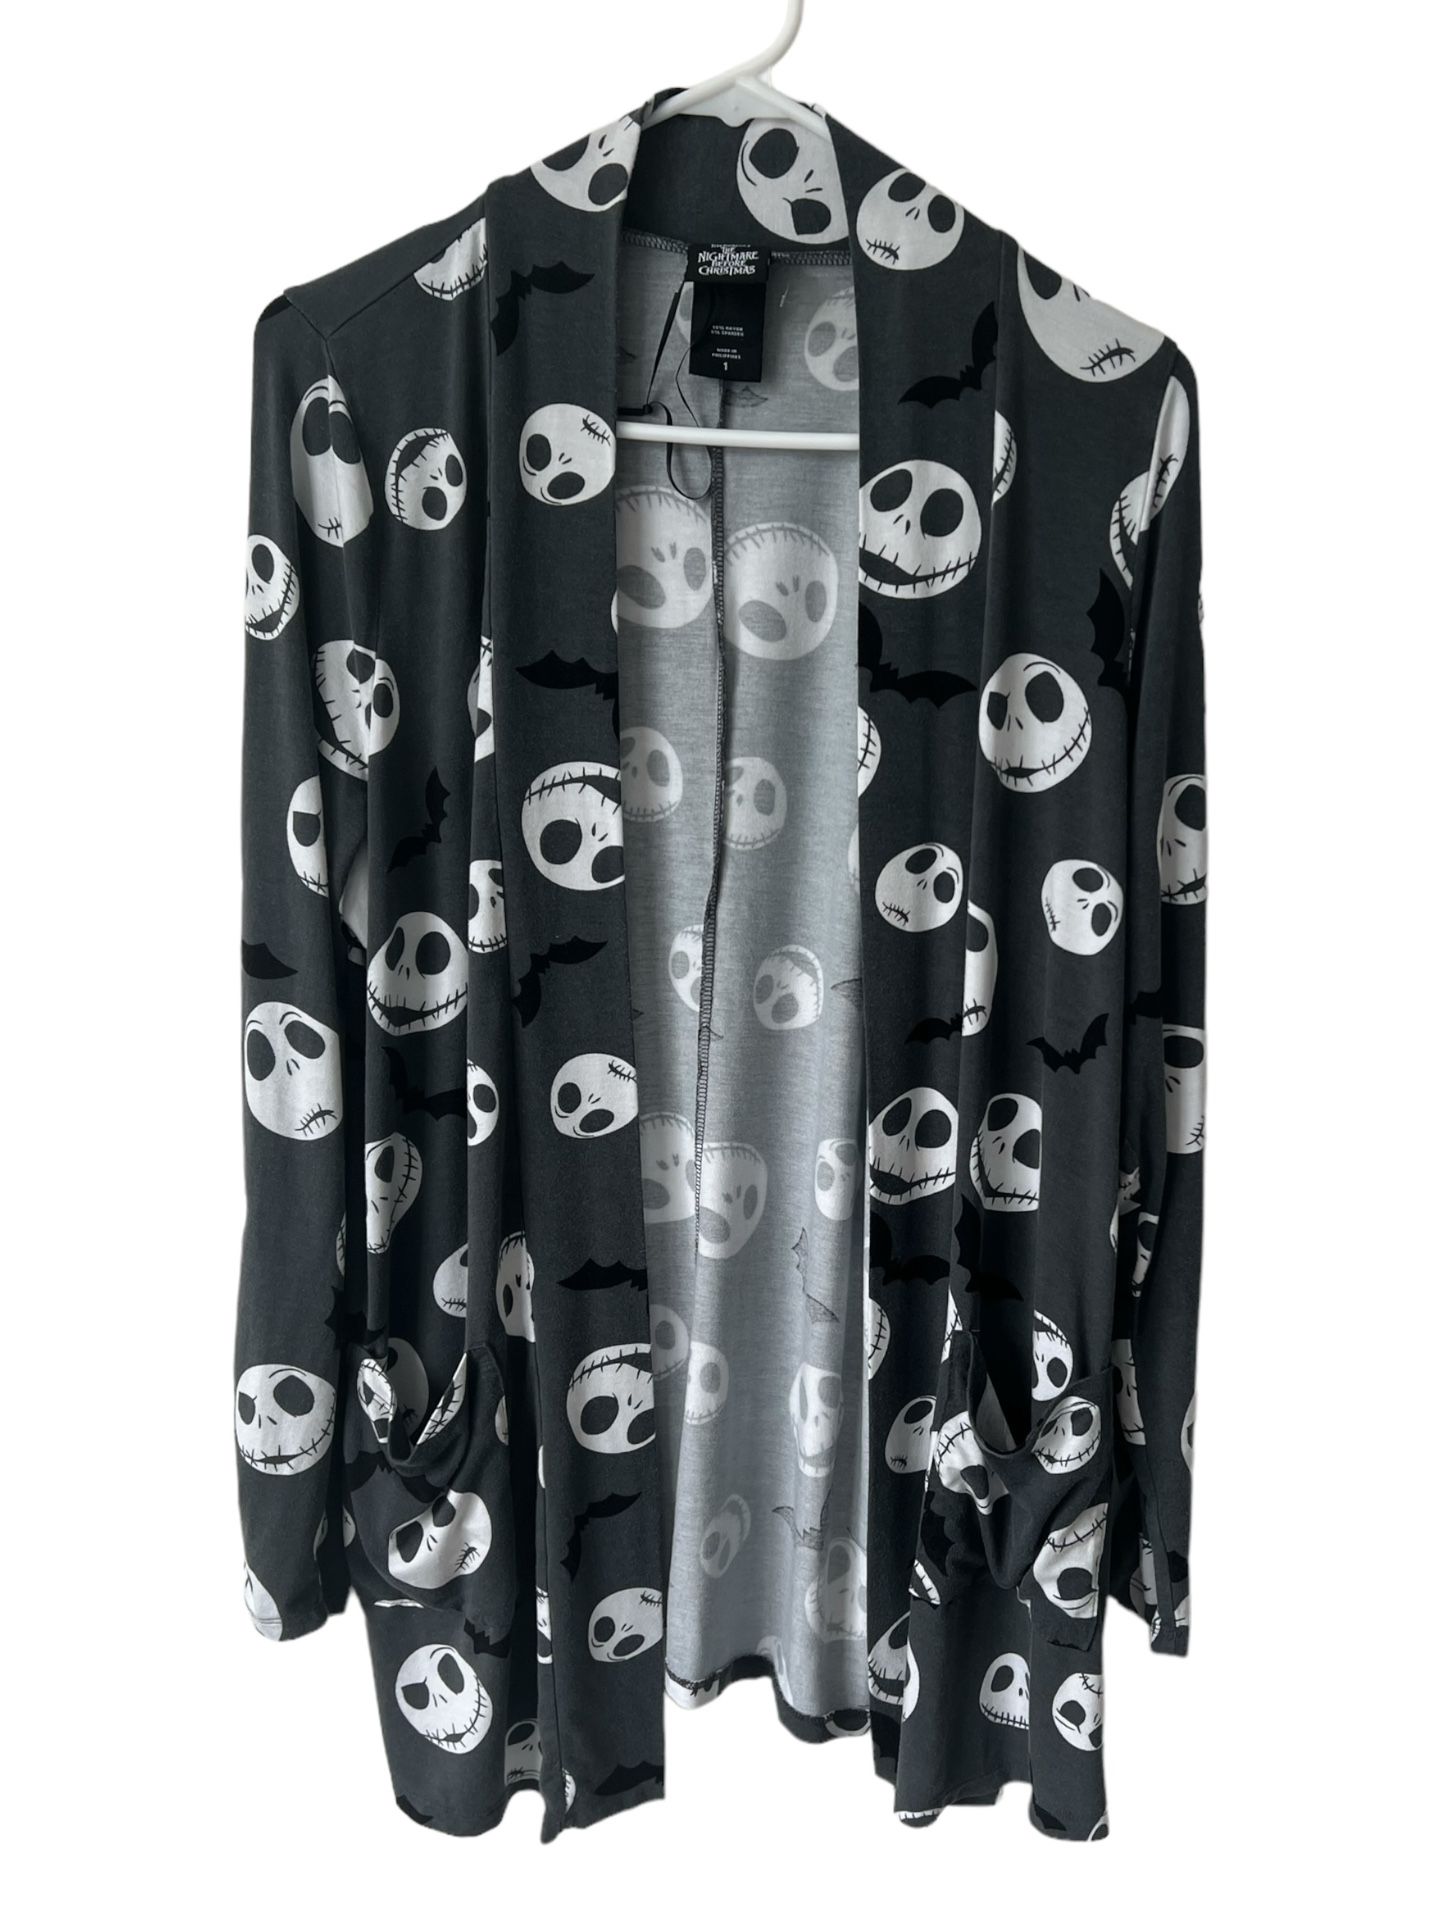 Disney The Nightmare Before Christmas Womens Open Front Cardigan Size 14 Black  Comes from a pet and smoke free home.  Measurements in pictures.  This